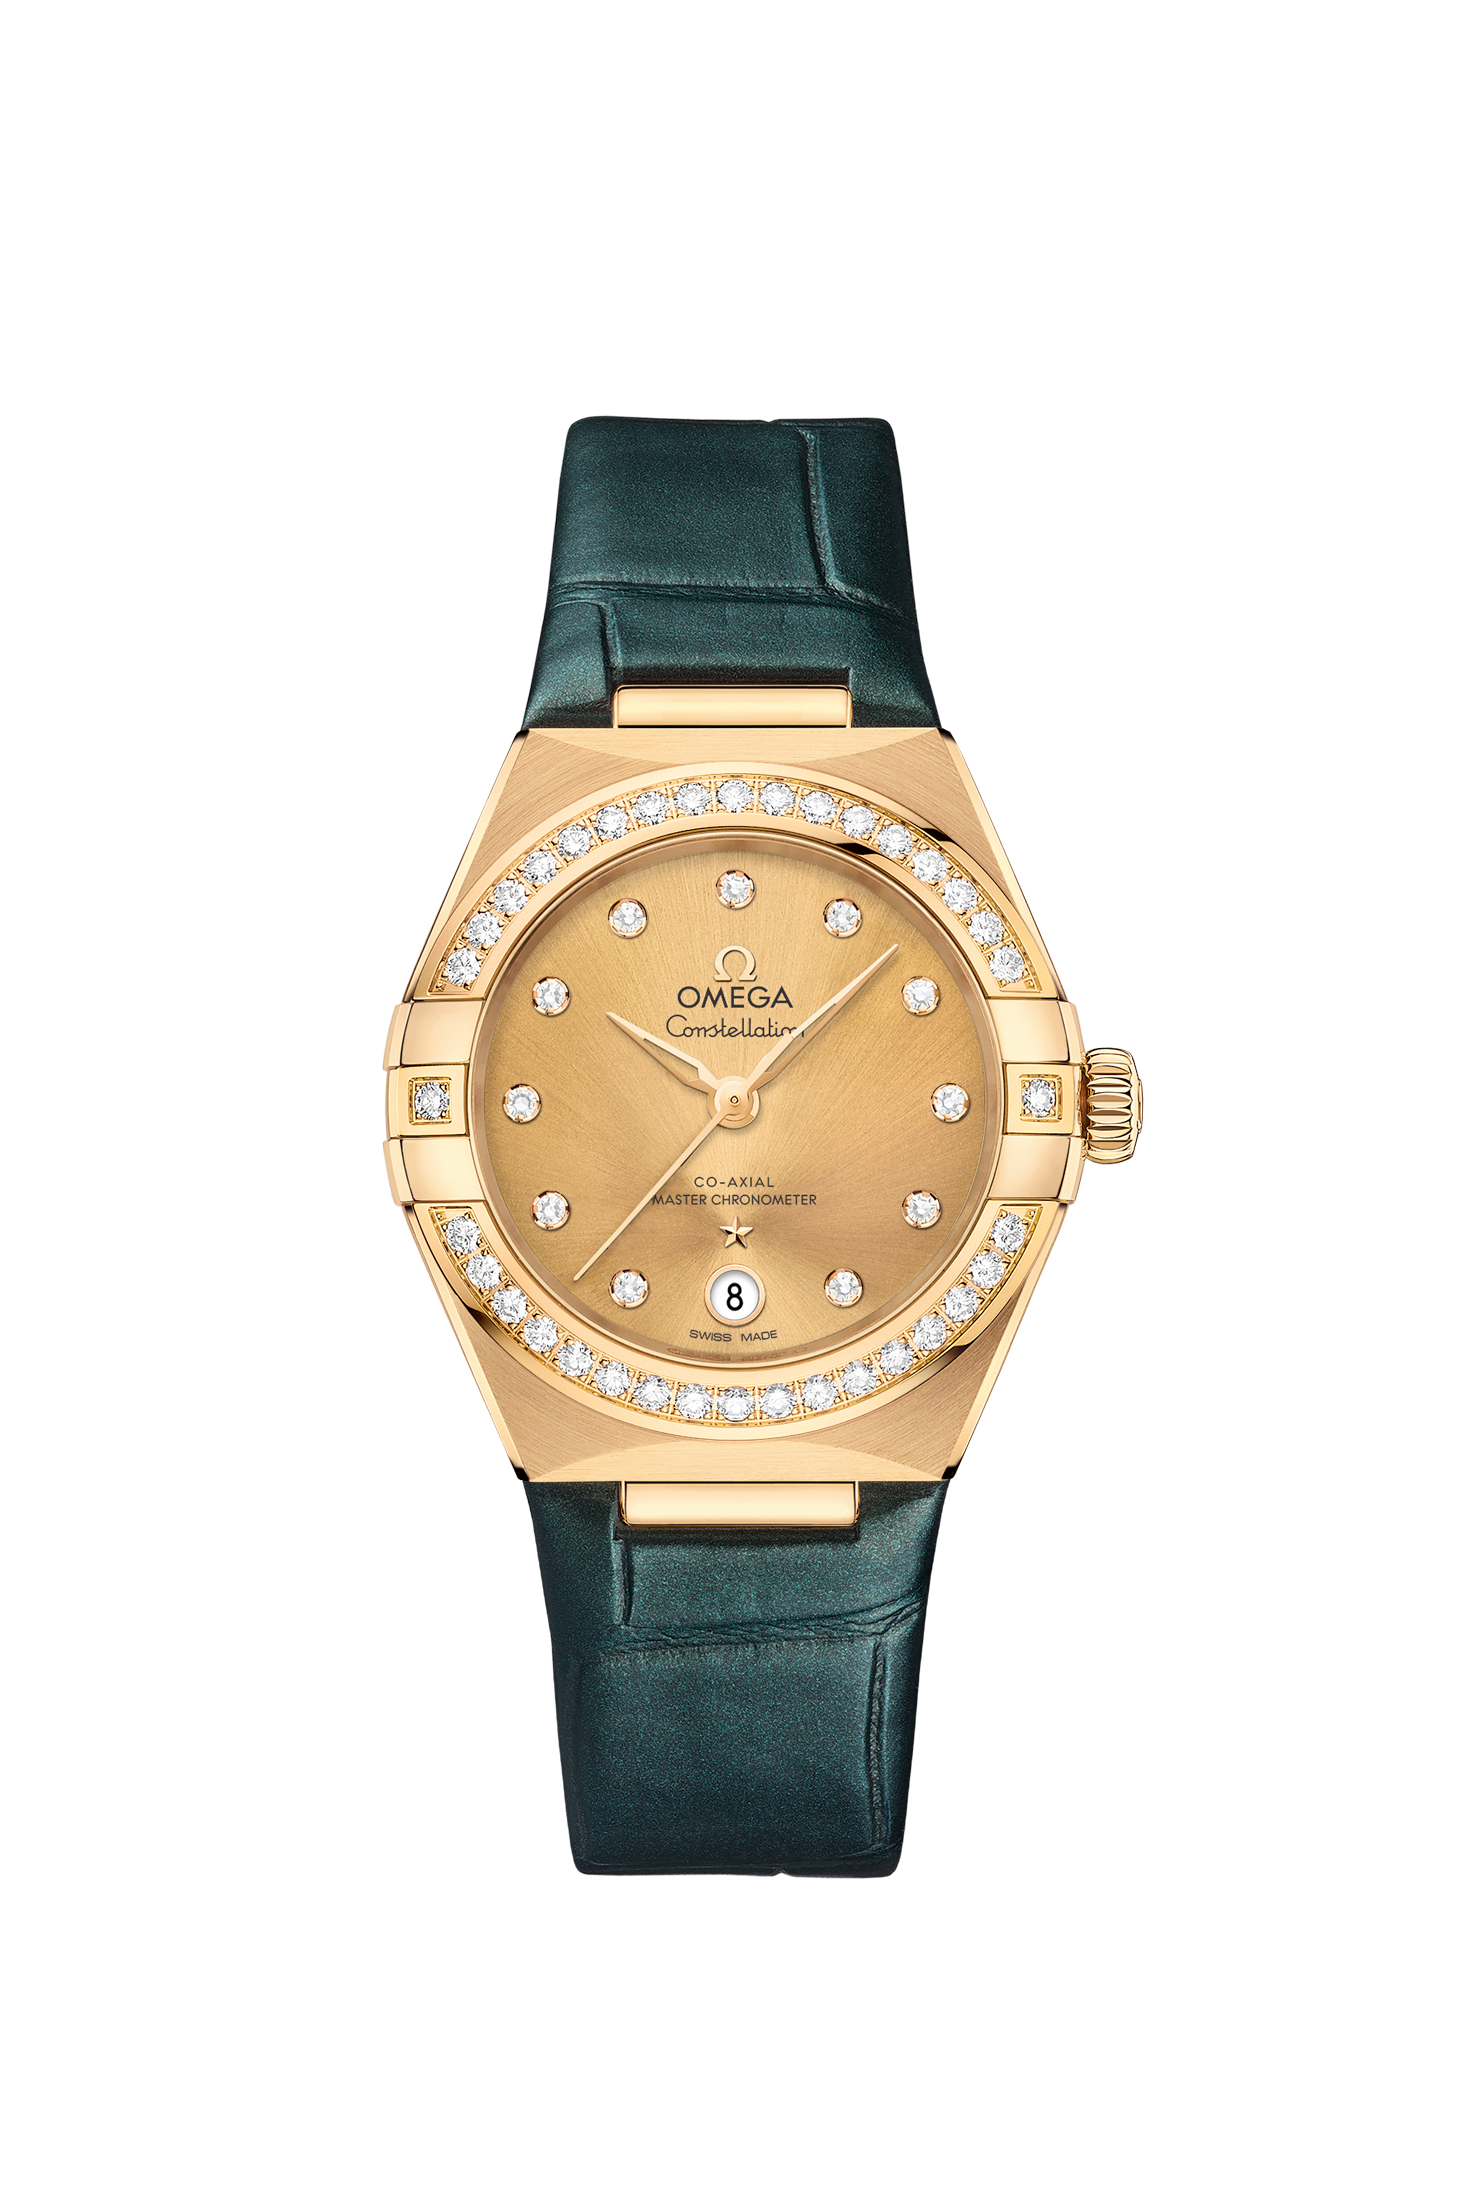 Ladies' watch  OMEGA, Constellation Co Axial Master Chronometer / 29mm, SKU: 131.58.29.20.58.001 | watchphilosophy.co.uk